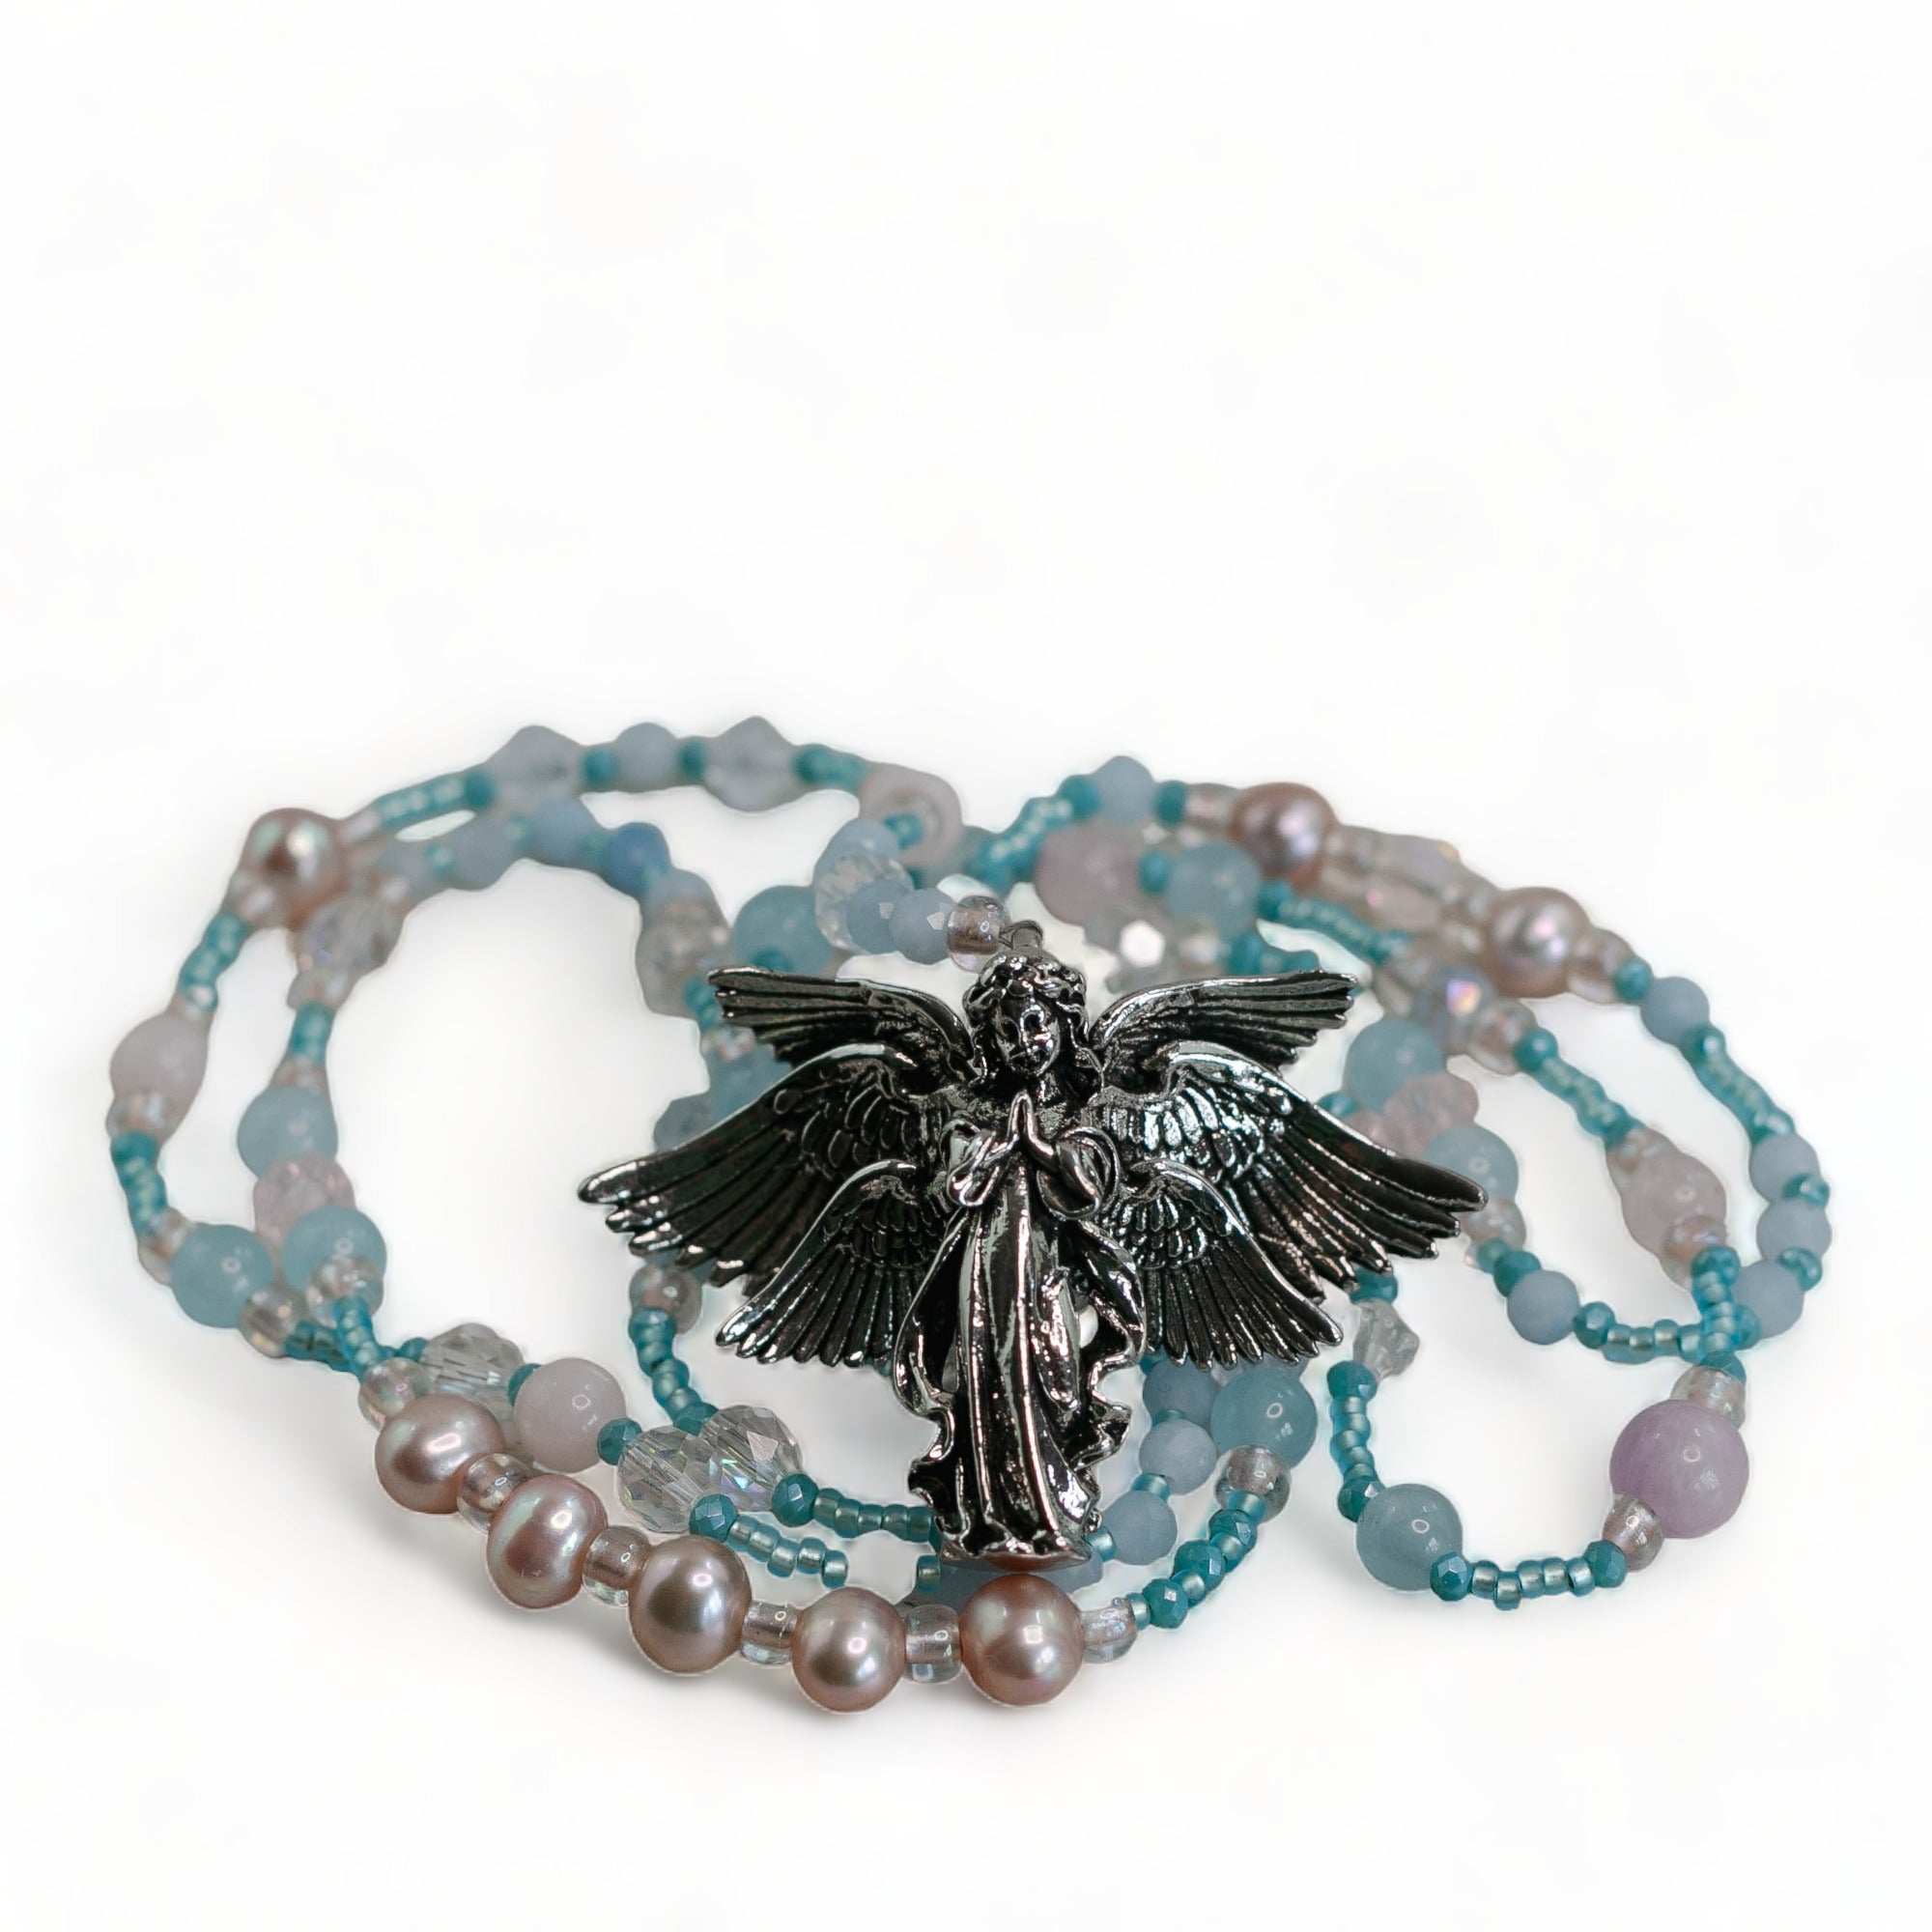 On Wings and Prayers - Angel pendant feature necklace with Aquamarine, Rose Quartz, Genuine Pearls and Kunzite